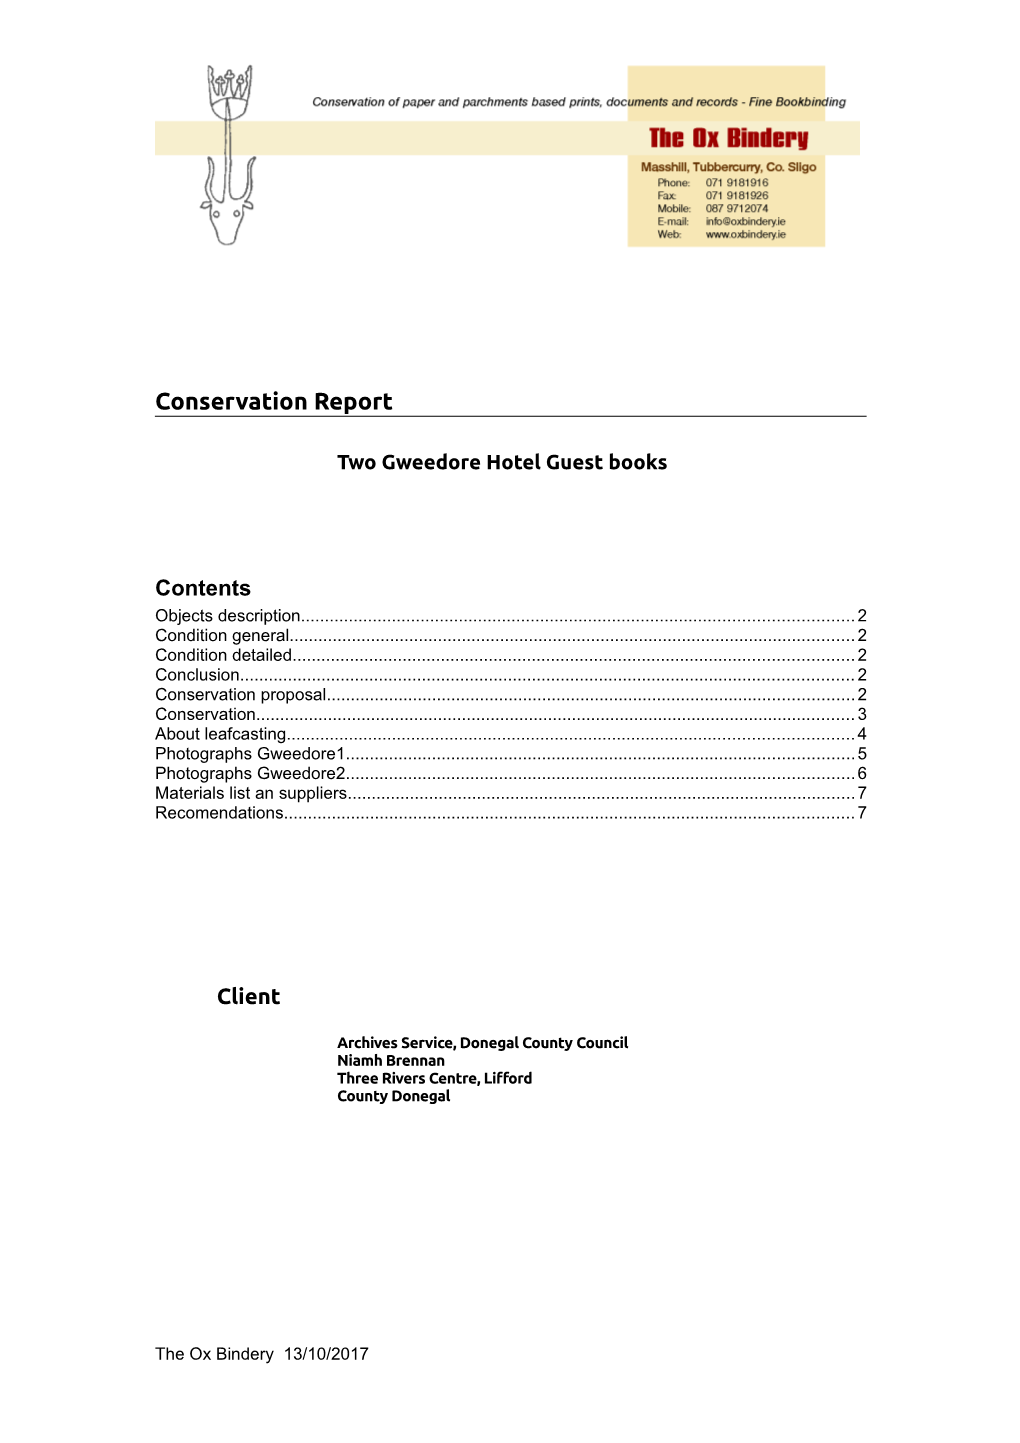 Gweedore Hotel Conservation Report